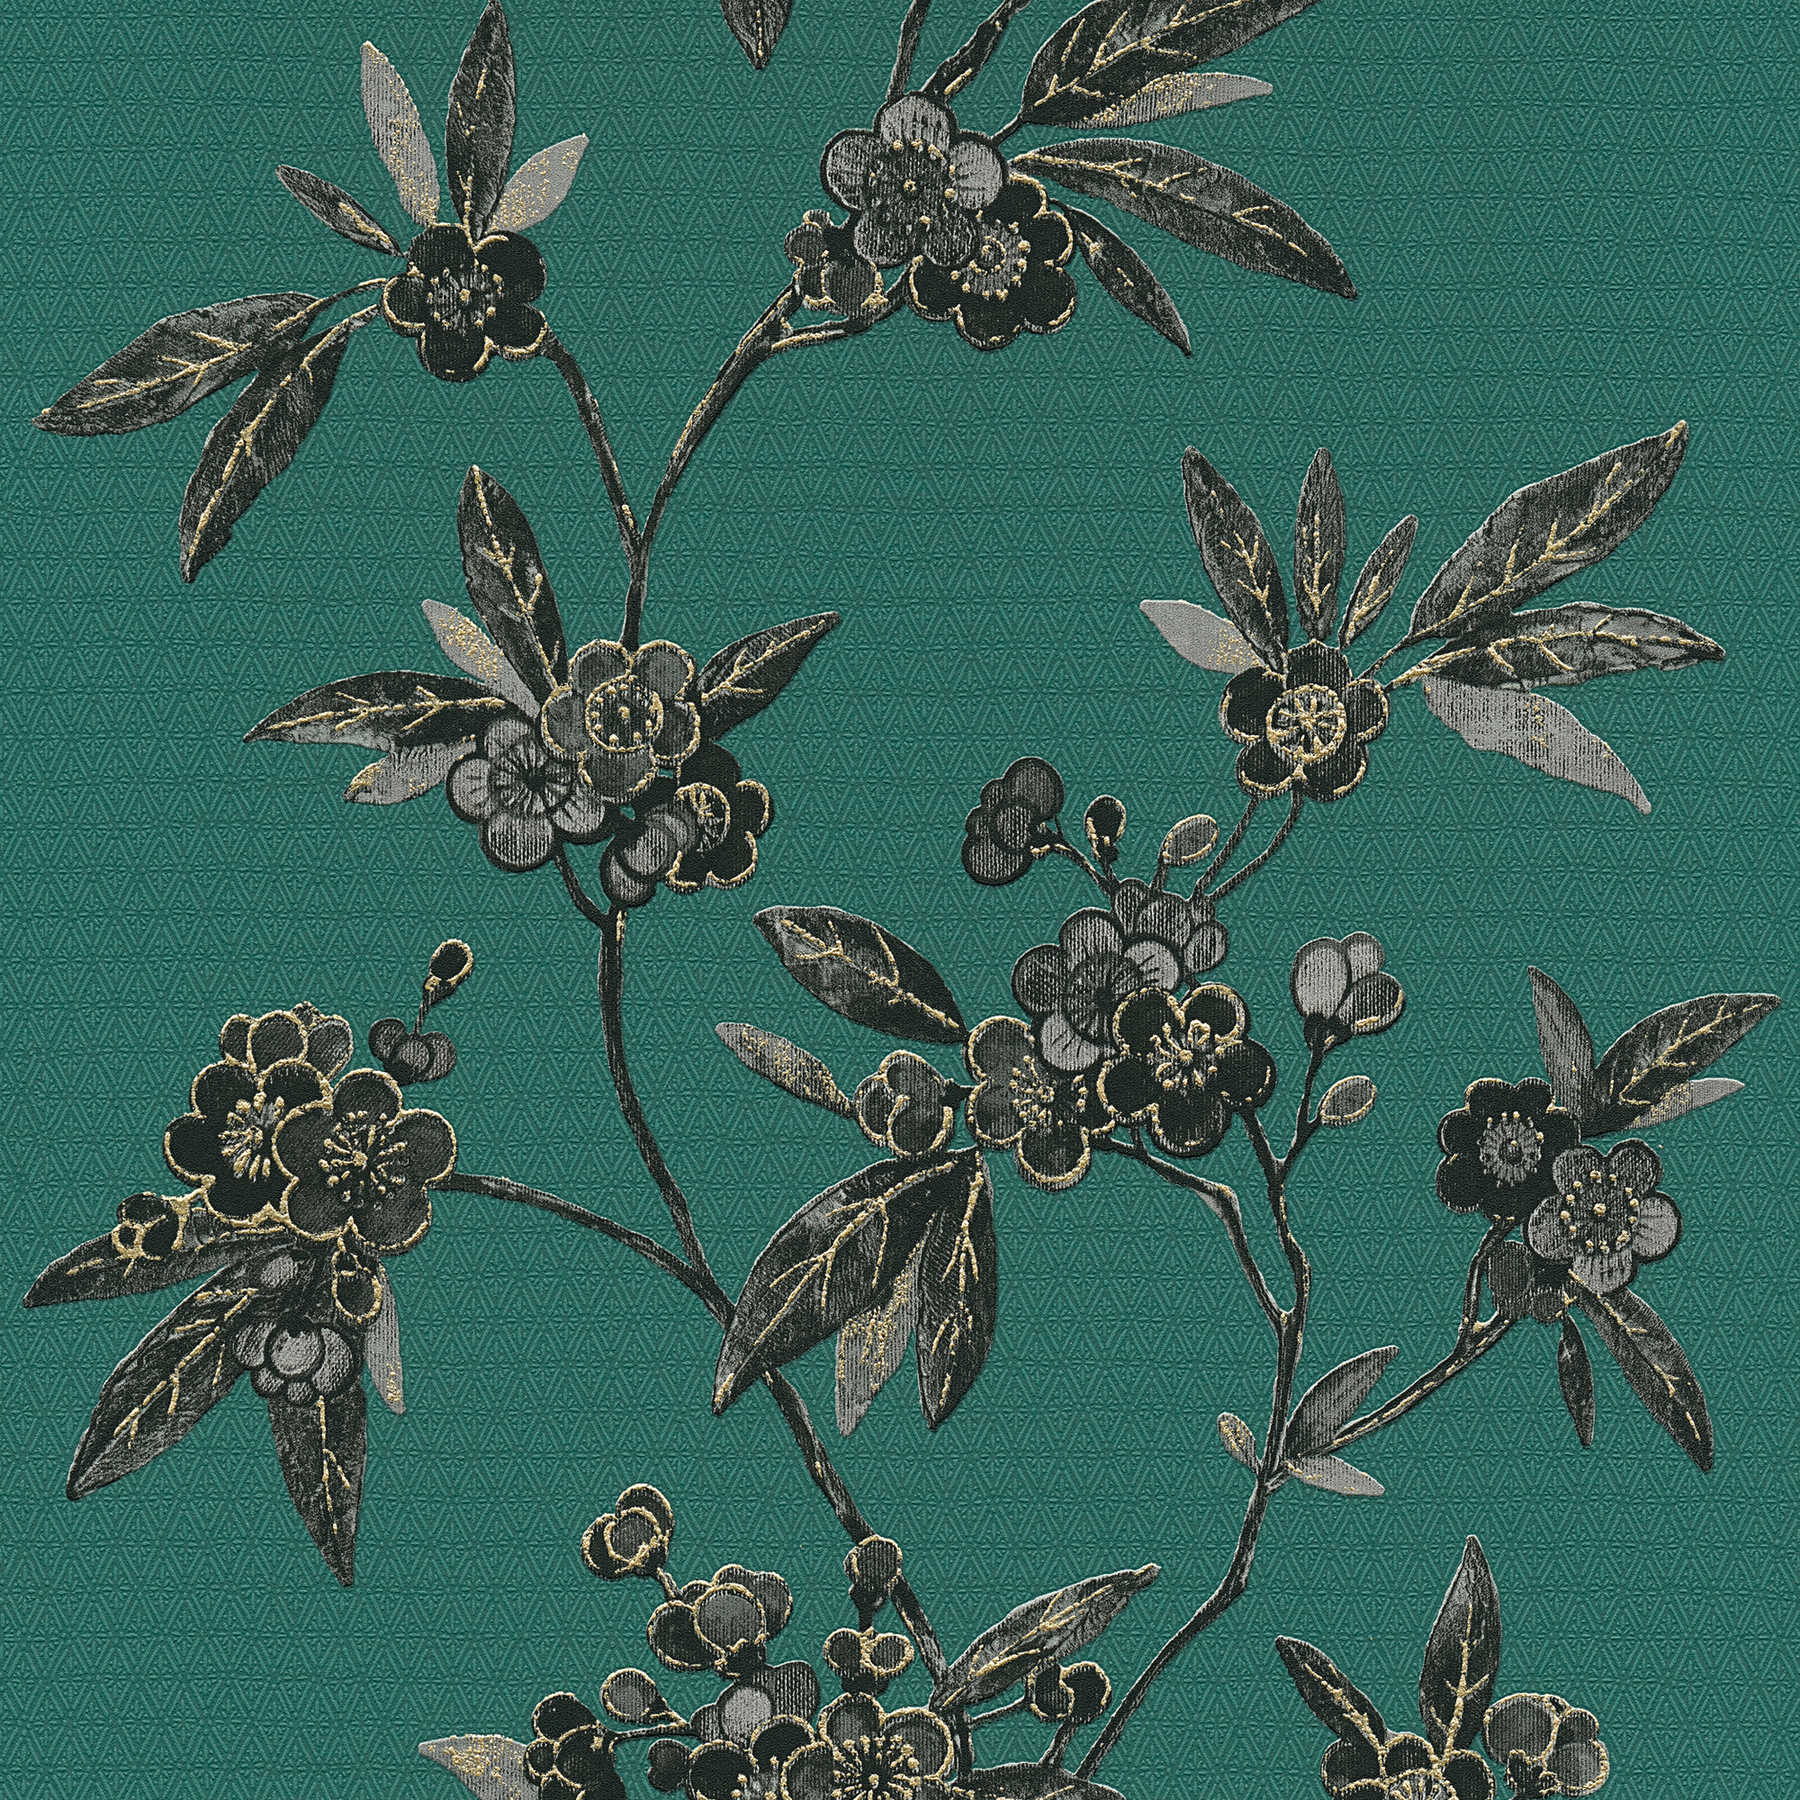         Floral wallpaper with flower tendrils in Asian style - green, black, grey
    